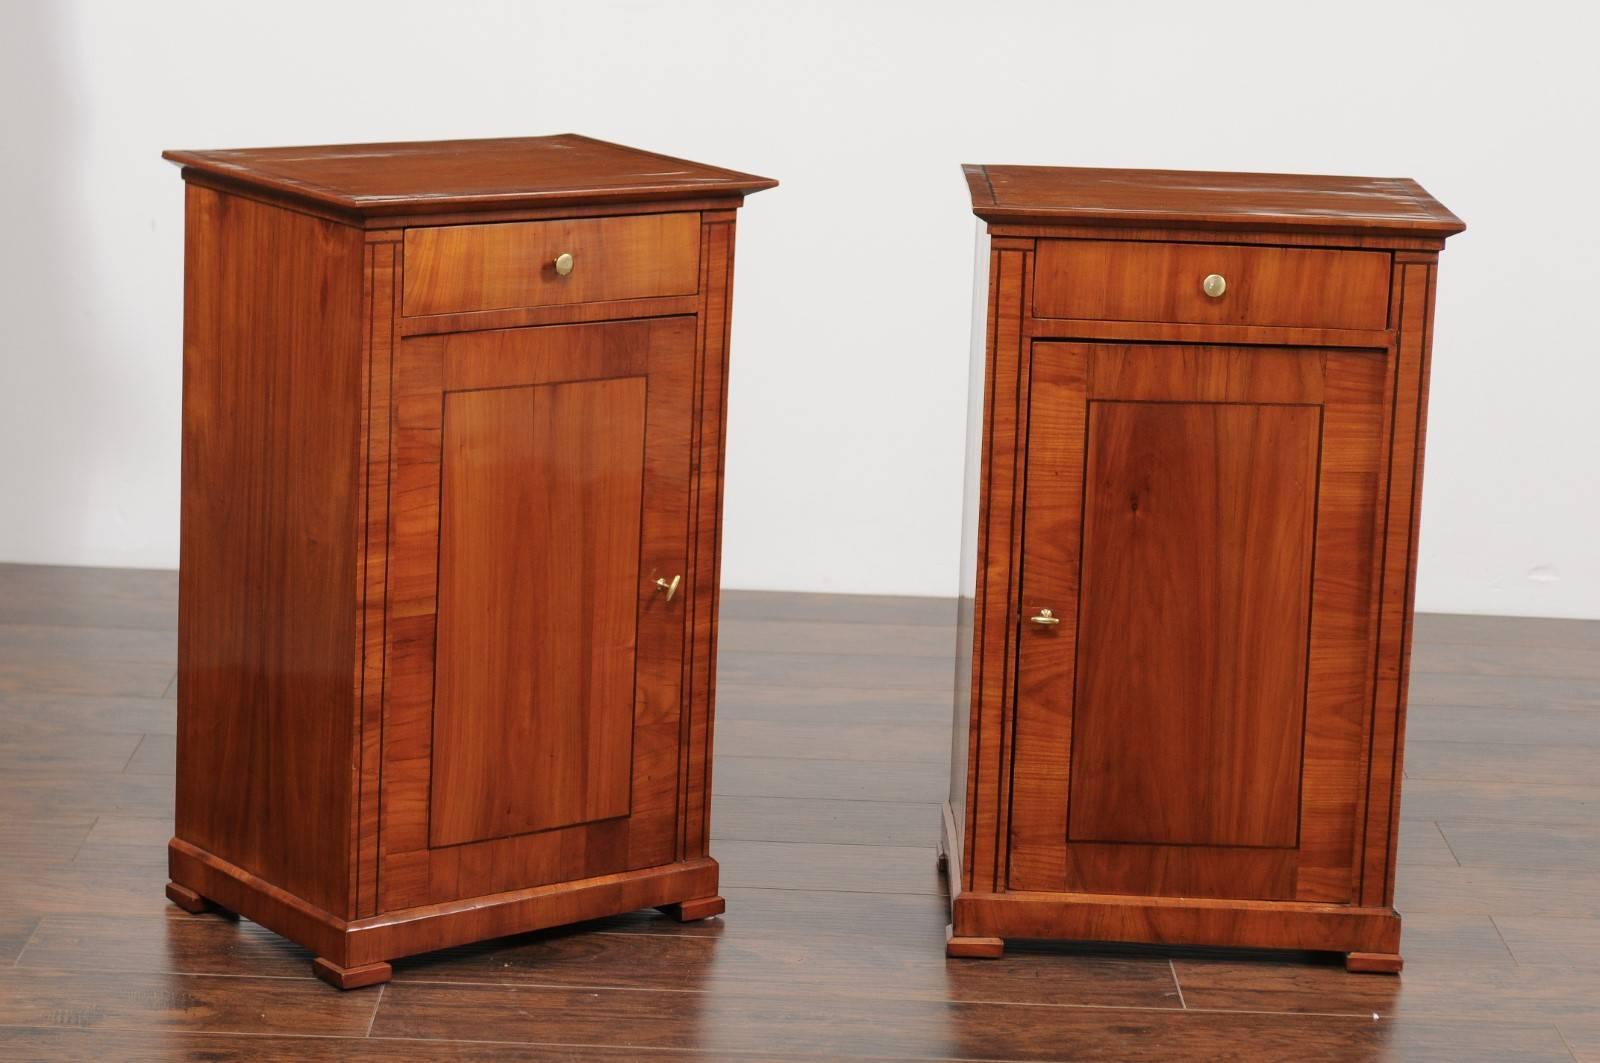 A pair of Austrian Biedermeier style walnut veneered cabinets with banded inlay from the second half of the 19th century. Each of this pair of Biedermeier stands features a rectangular top adorned with a thin banded inlay of darker color, sitting